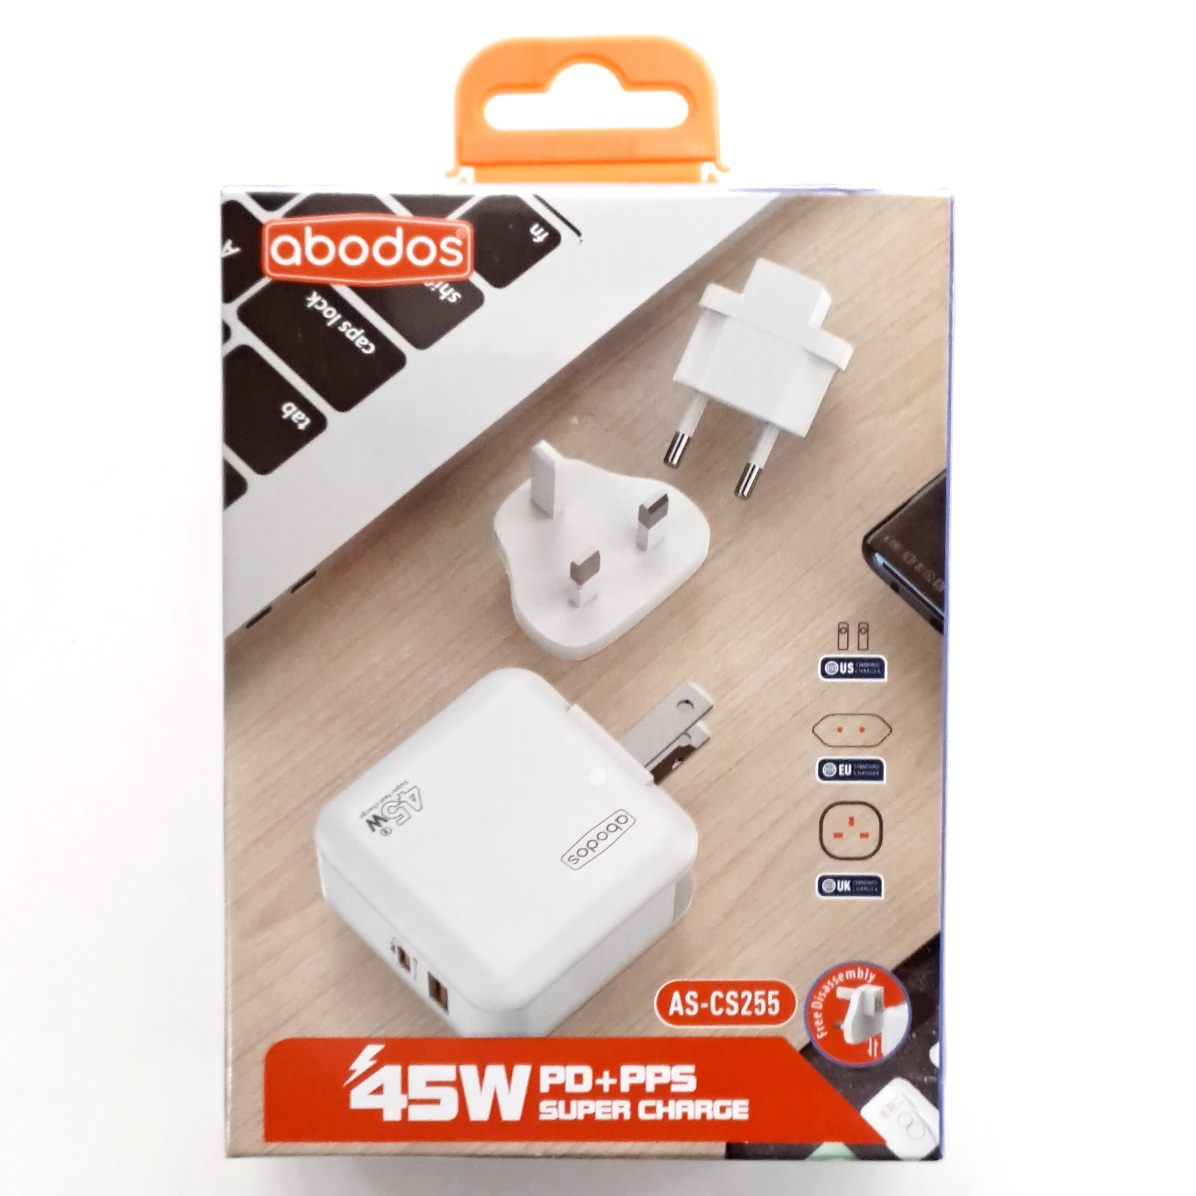 AS-CS255 abodos 45W PD+PPS (USB-AM + USB-CM) Fast Charger